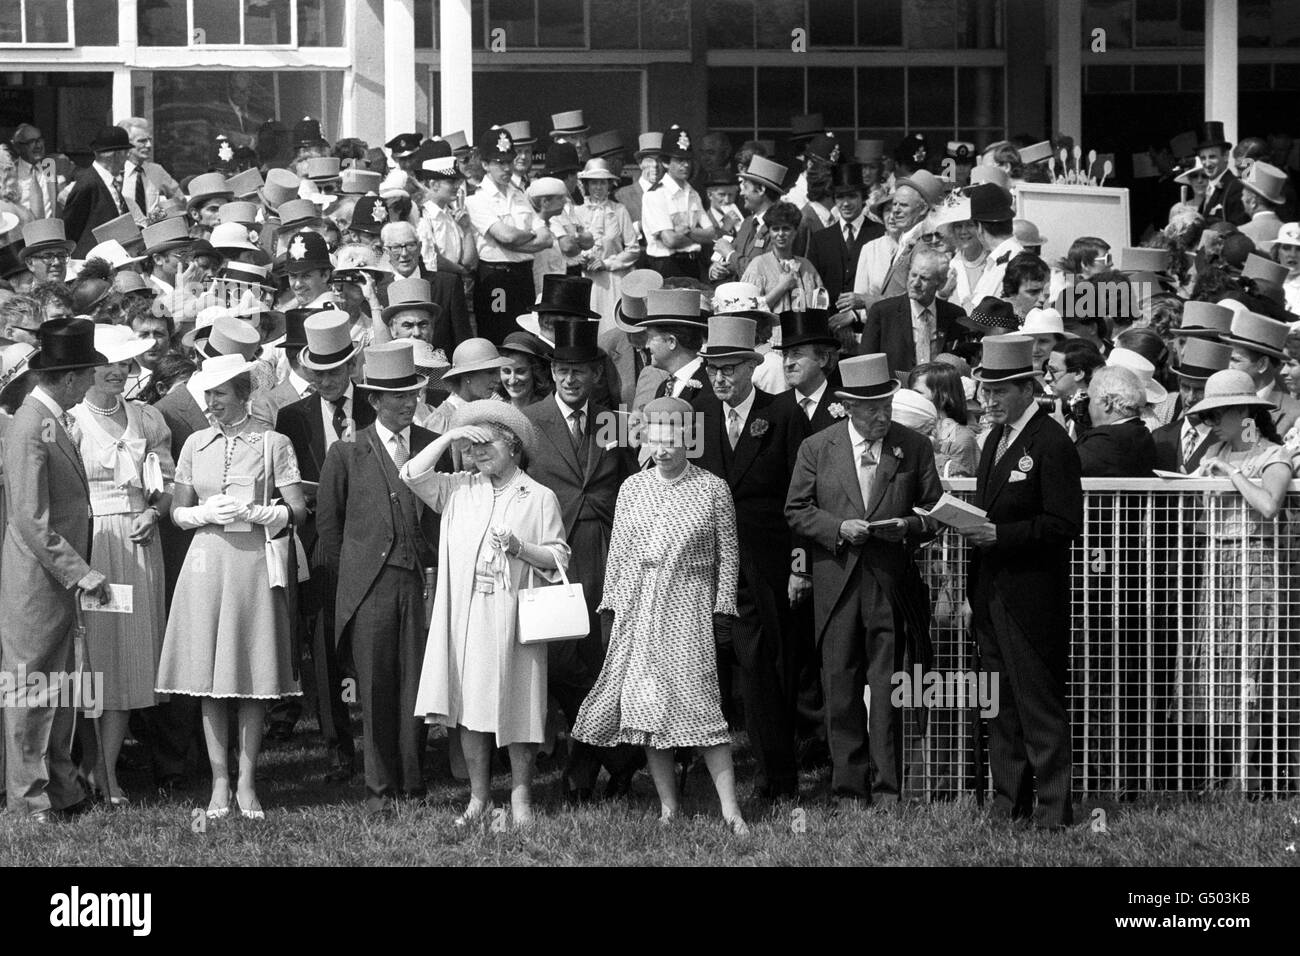 The Queen and the Queen Mother on the course ahead of the Derby Stakes. Also pictured from the royal family are Princess Anne, Hon Angus Ogilvy, Princess Michael of Kent and the Duke of Edinburgh. Stock Photo